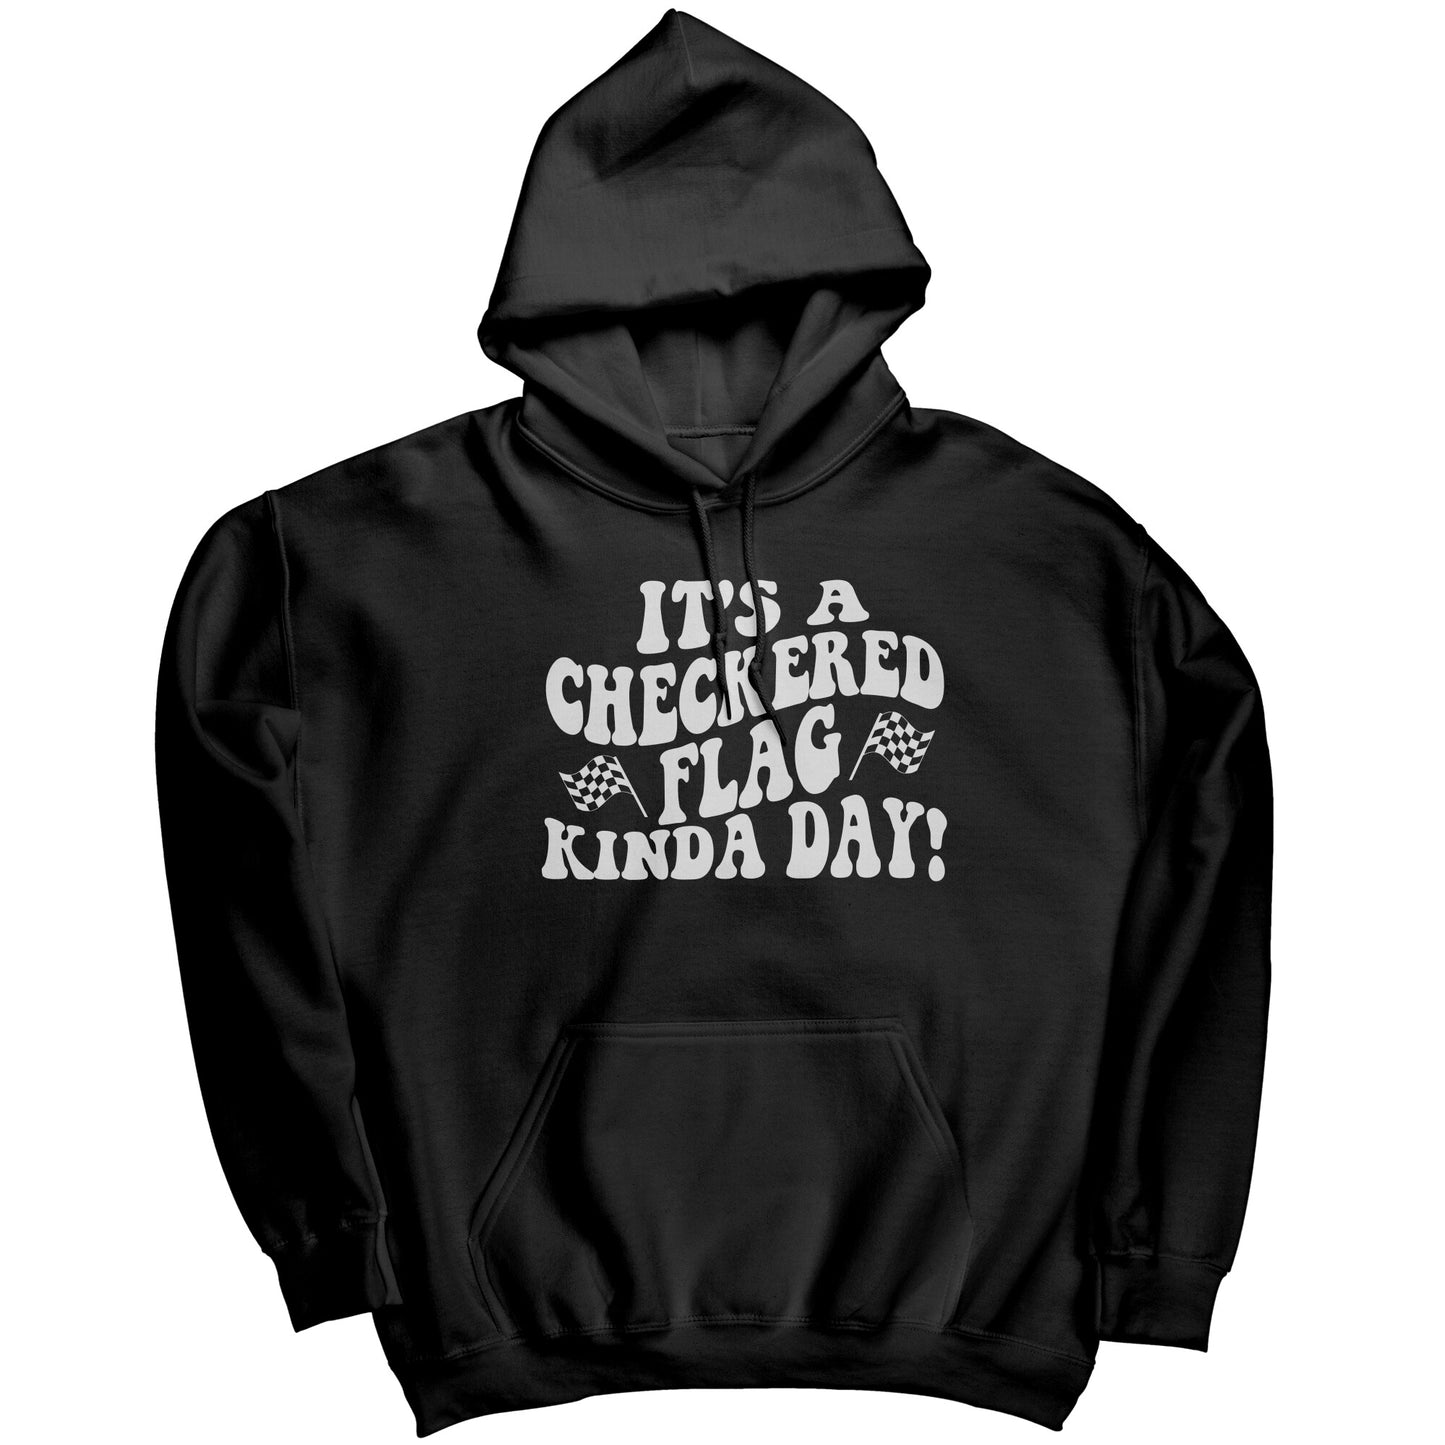 It's A Checkered Flag Kind Of Day Hoodie Sweatshirt